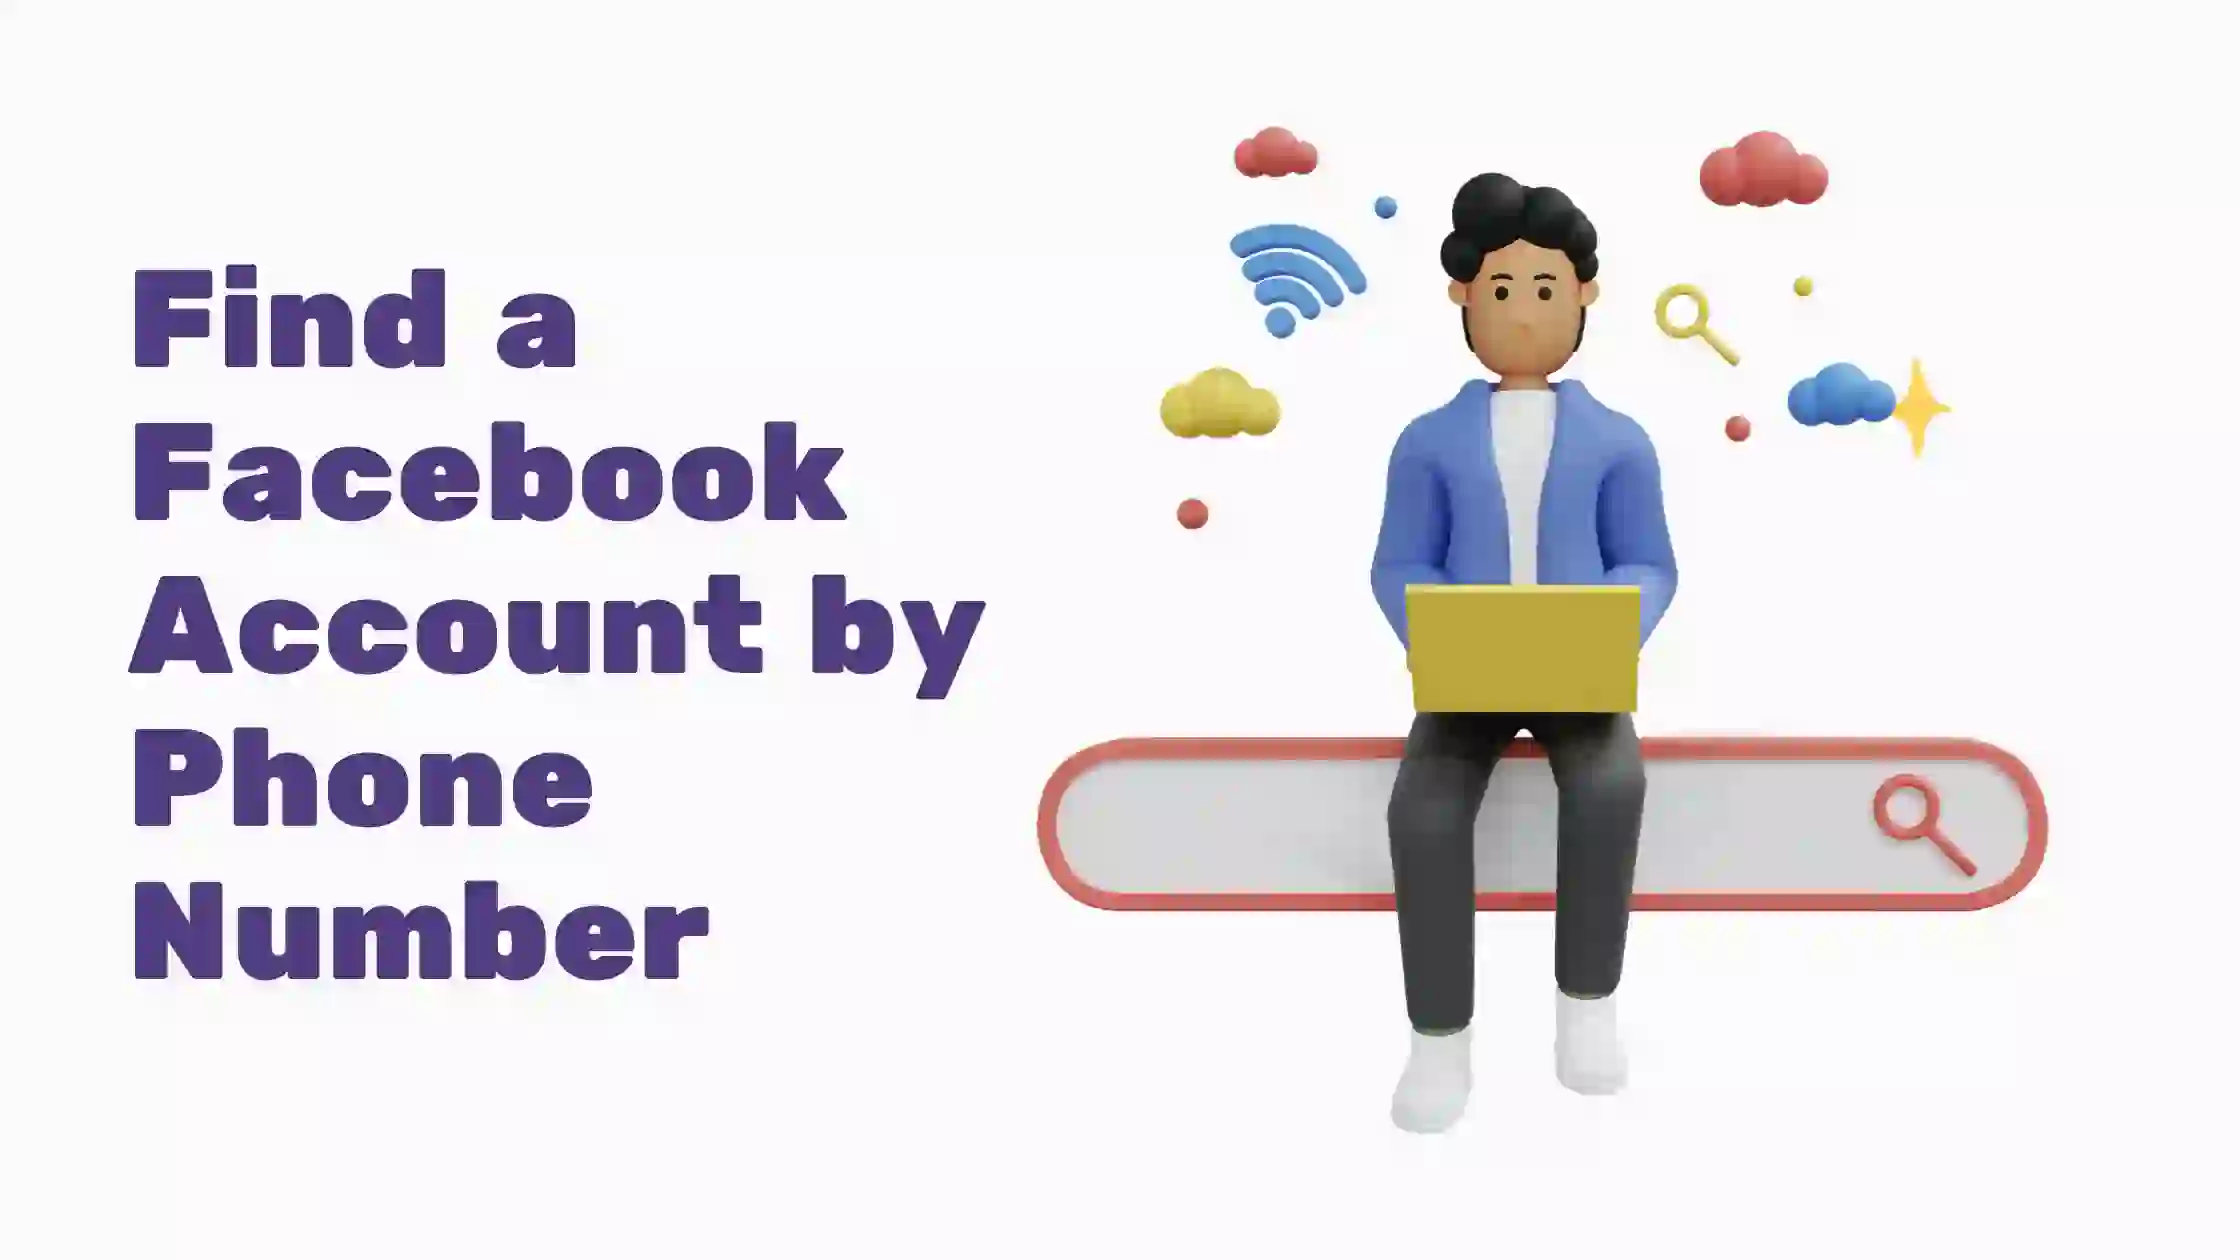 Find a Facebook Account by Phone Number